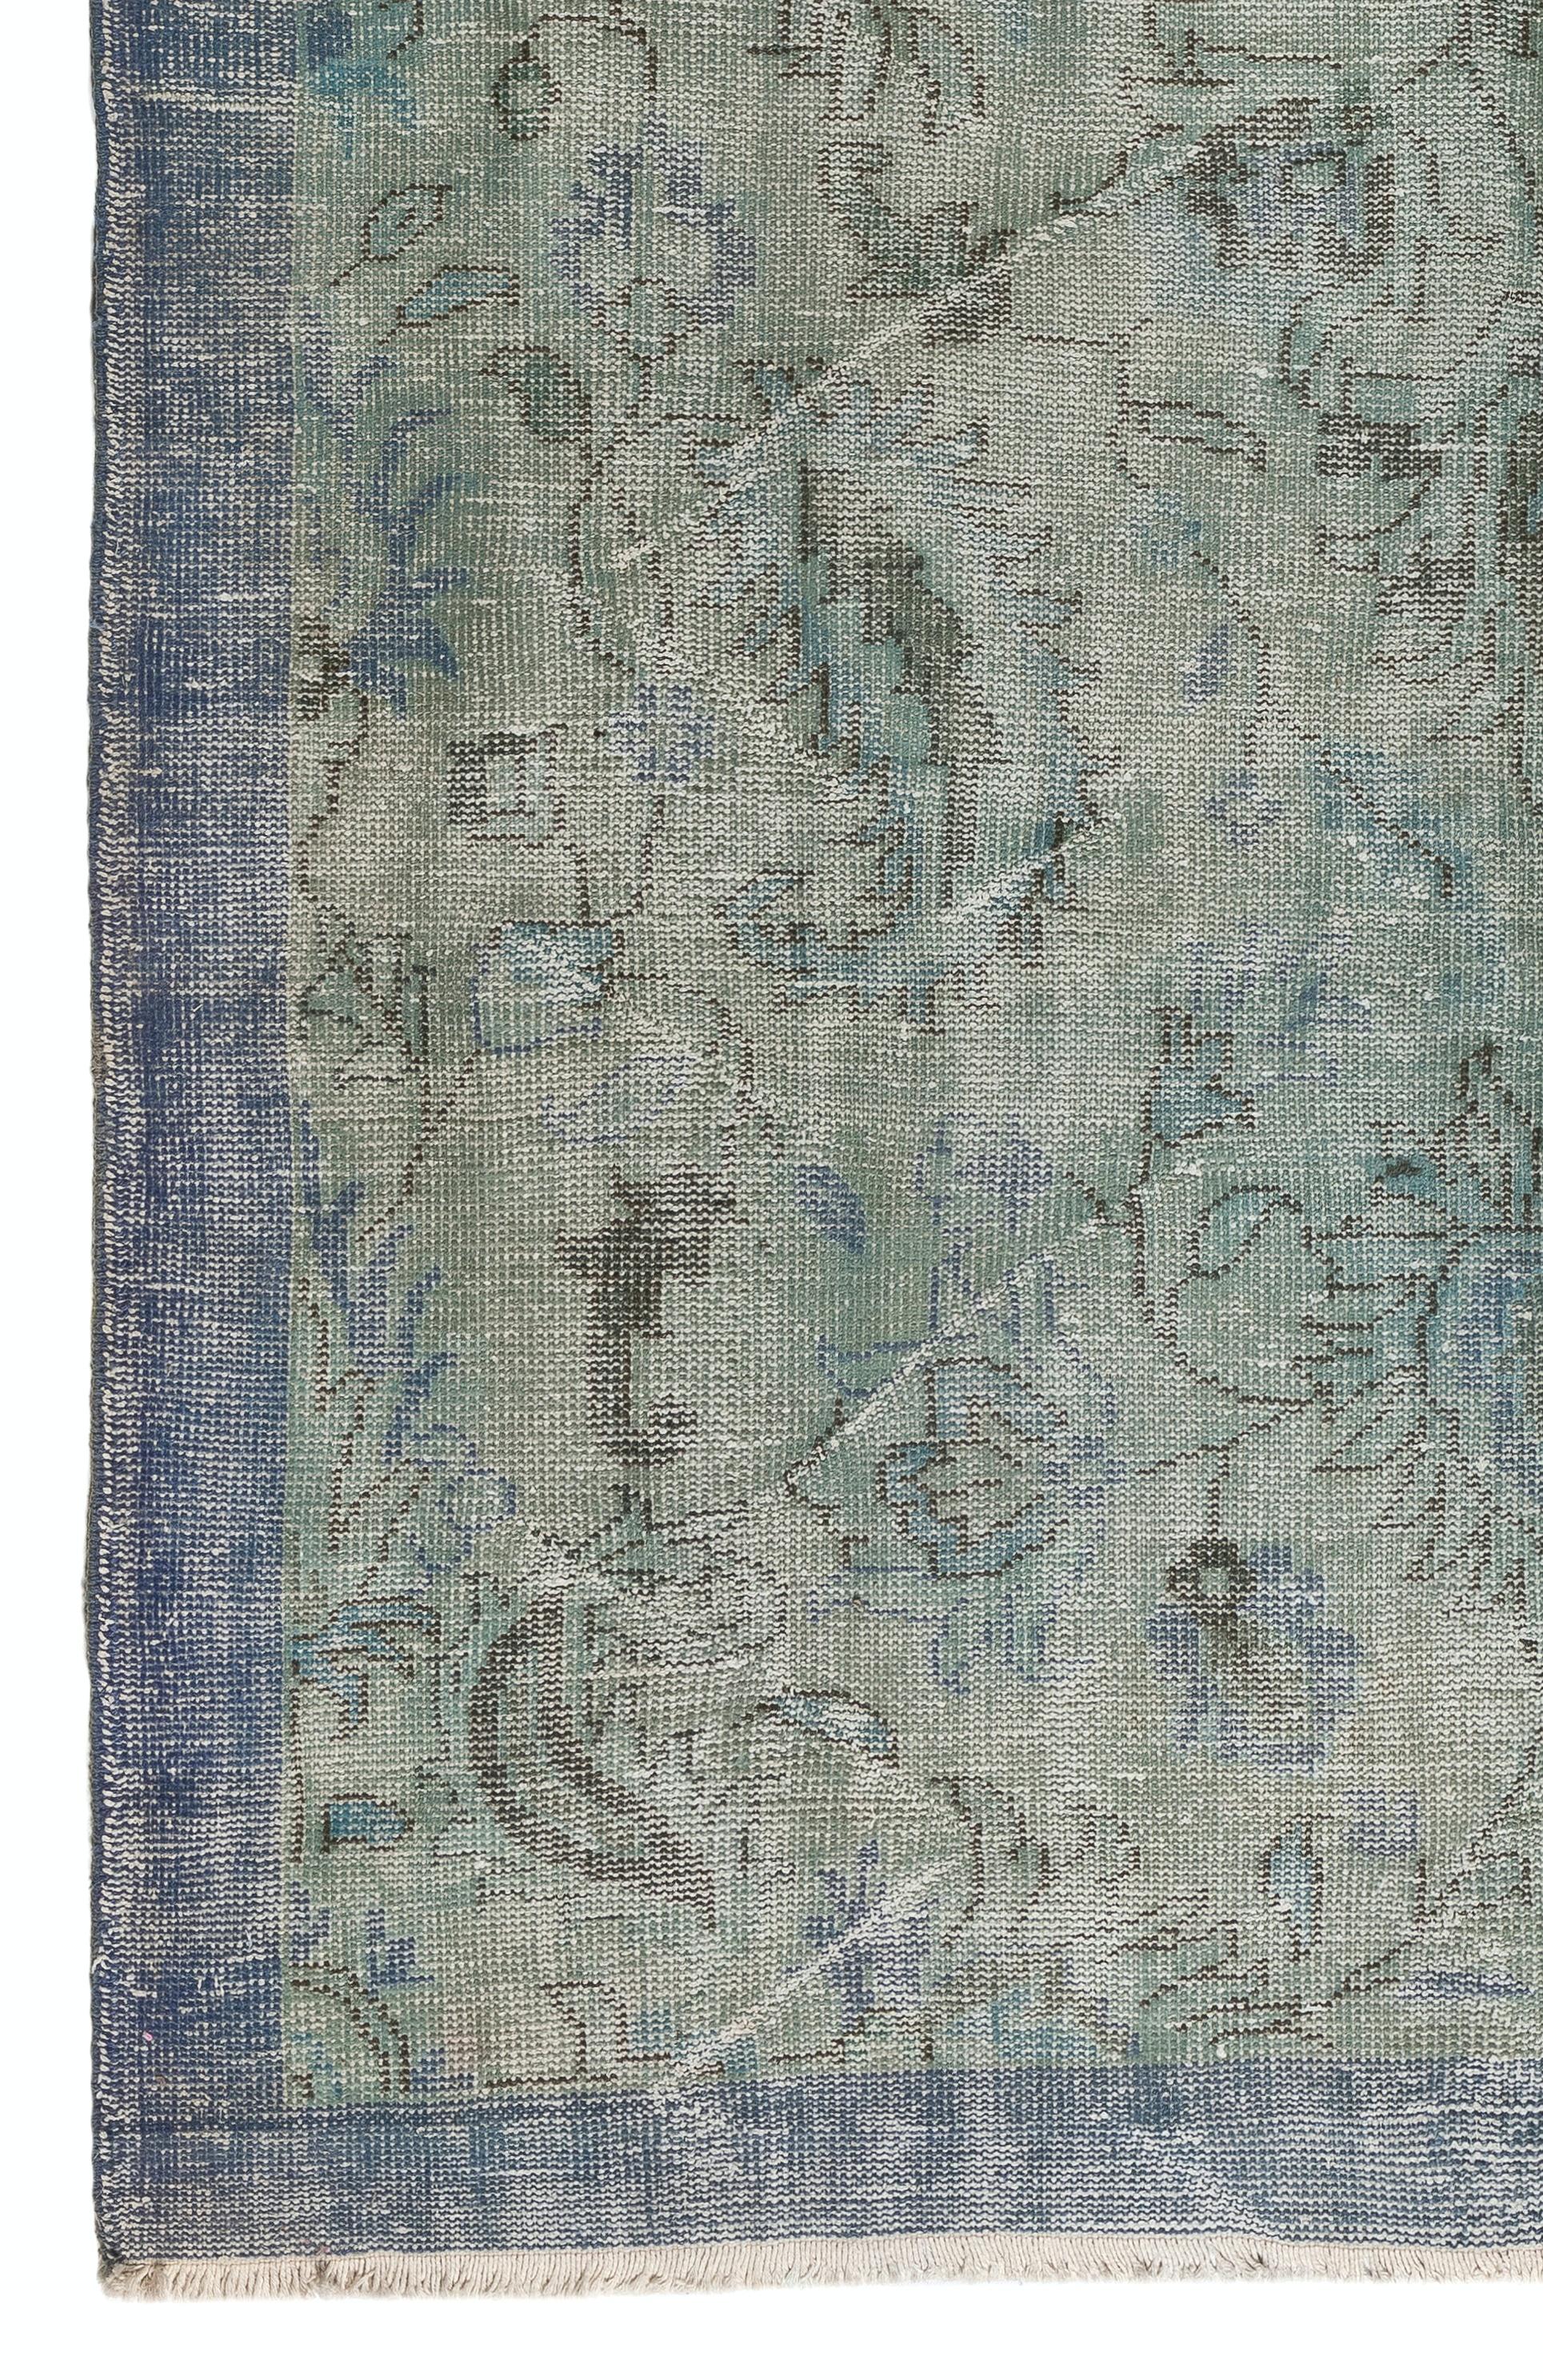 Turkish 6x9.5 Ft Distressed Vintage Floral Anatolian Area Rug Over-Dyed in Blue Color